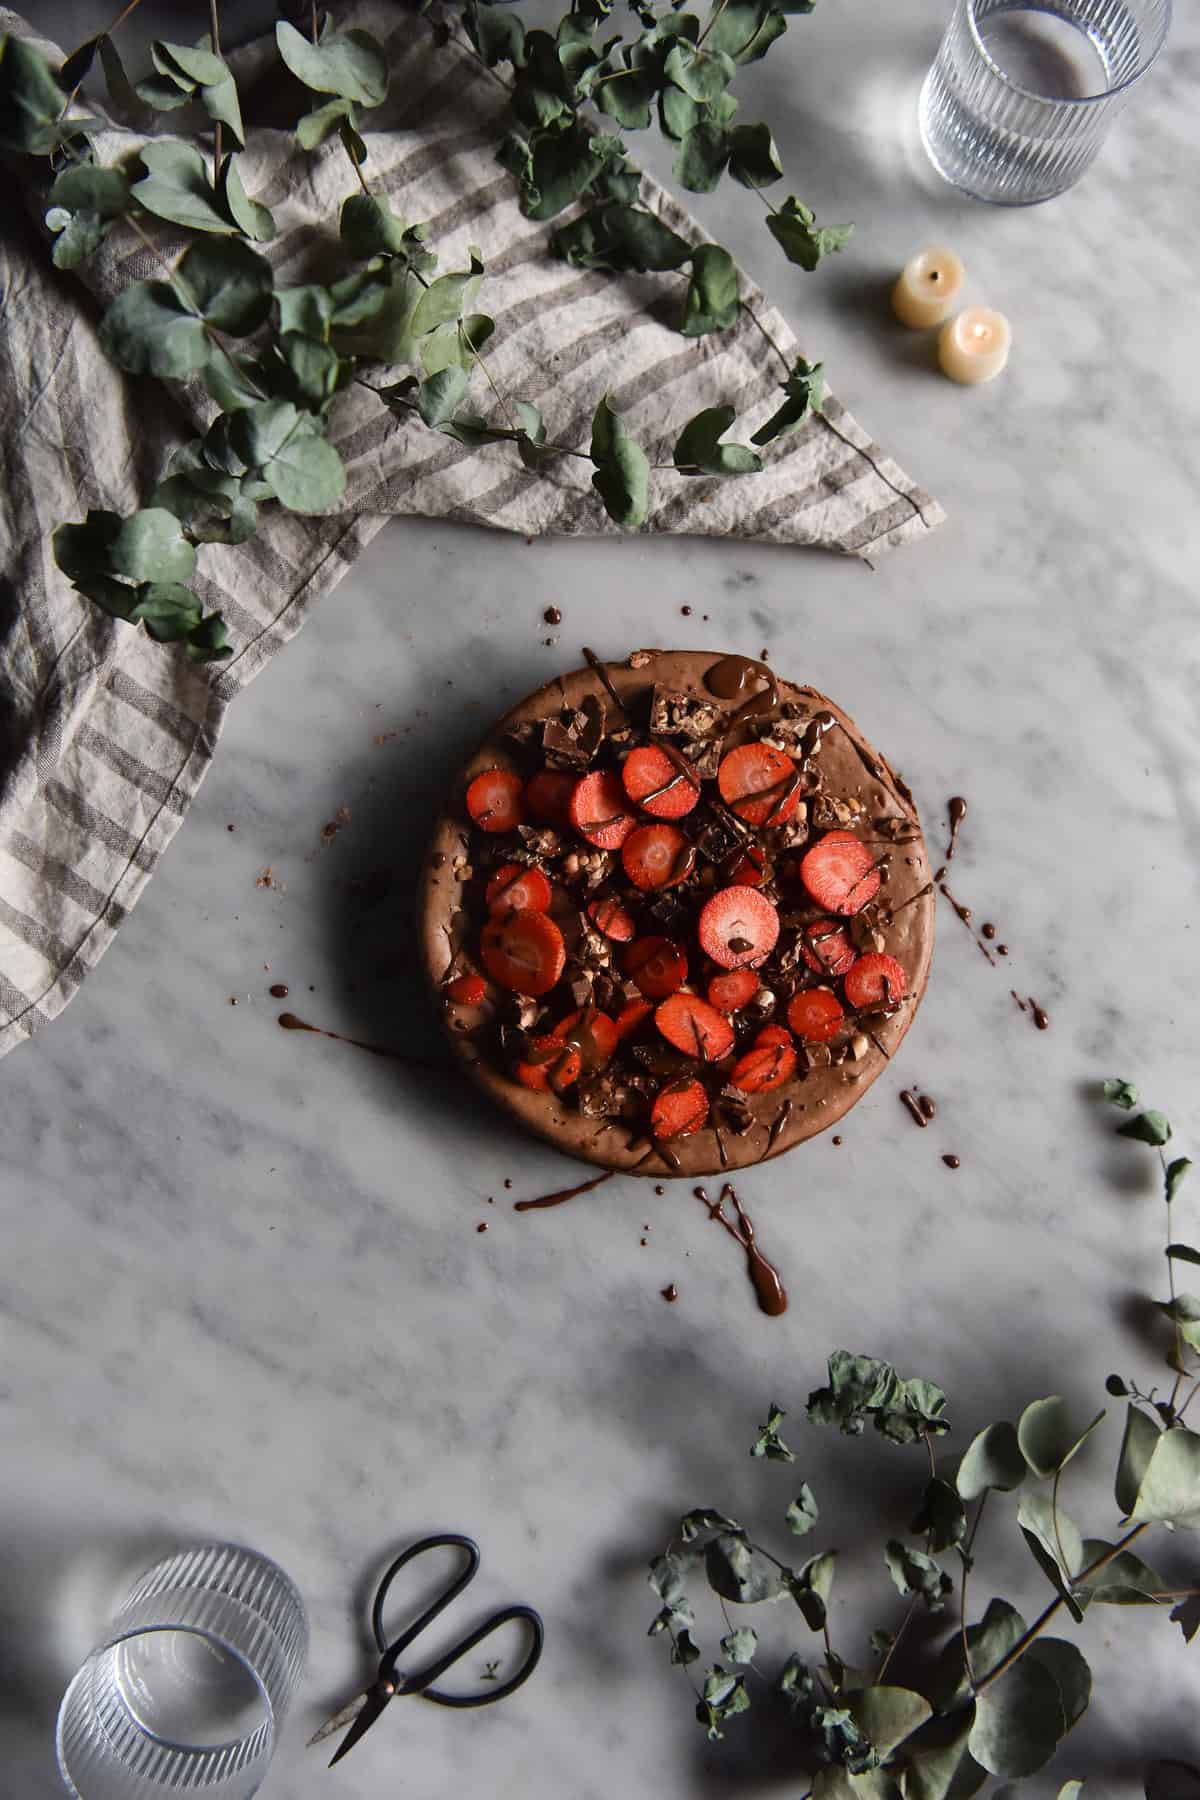 An aerial image of a gluten free chocolate peanut butter cheesecake on a marble table. The cheesecake is topped with strawberries and drizzles of melted chocolate.